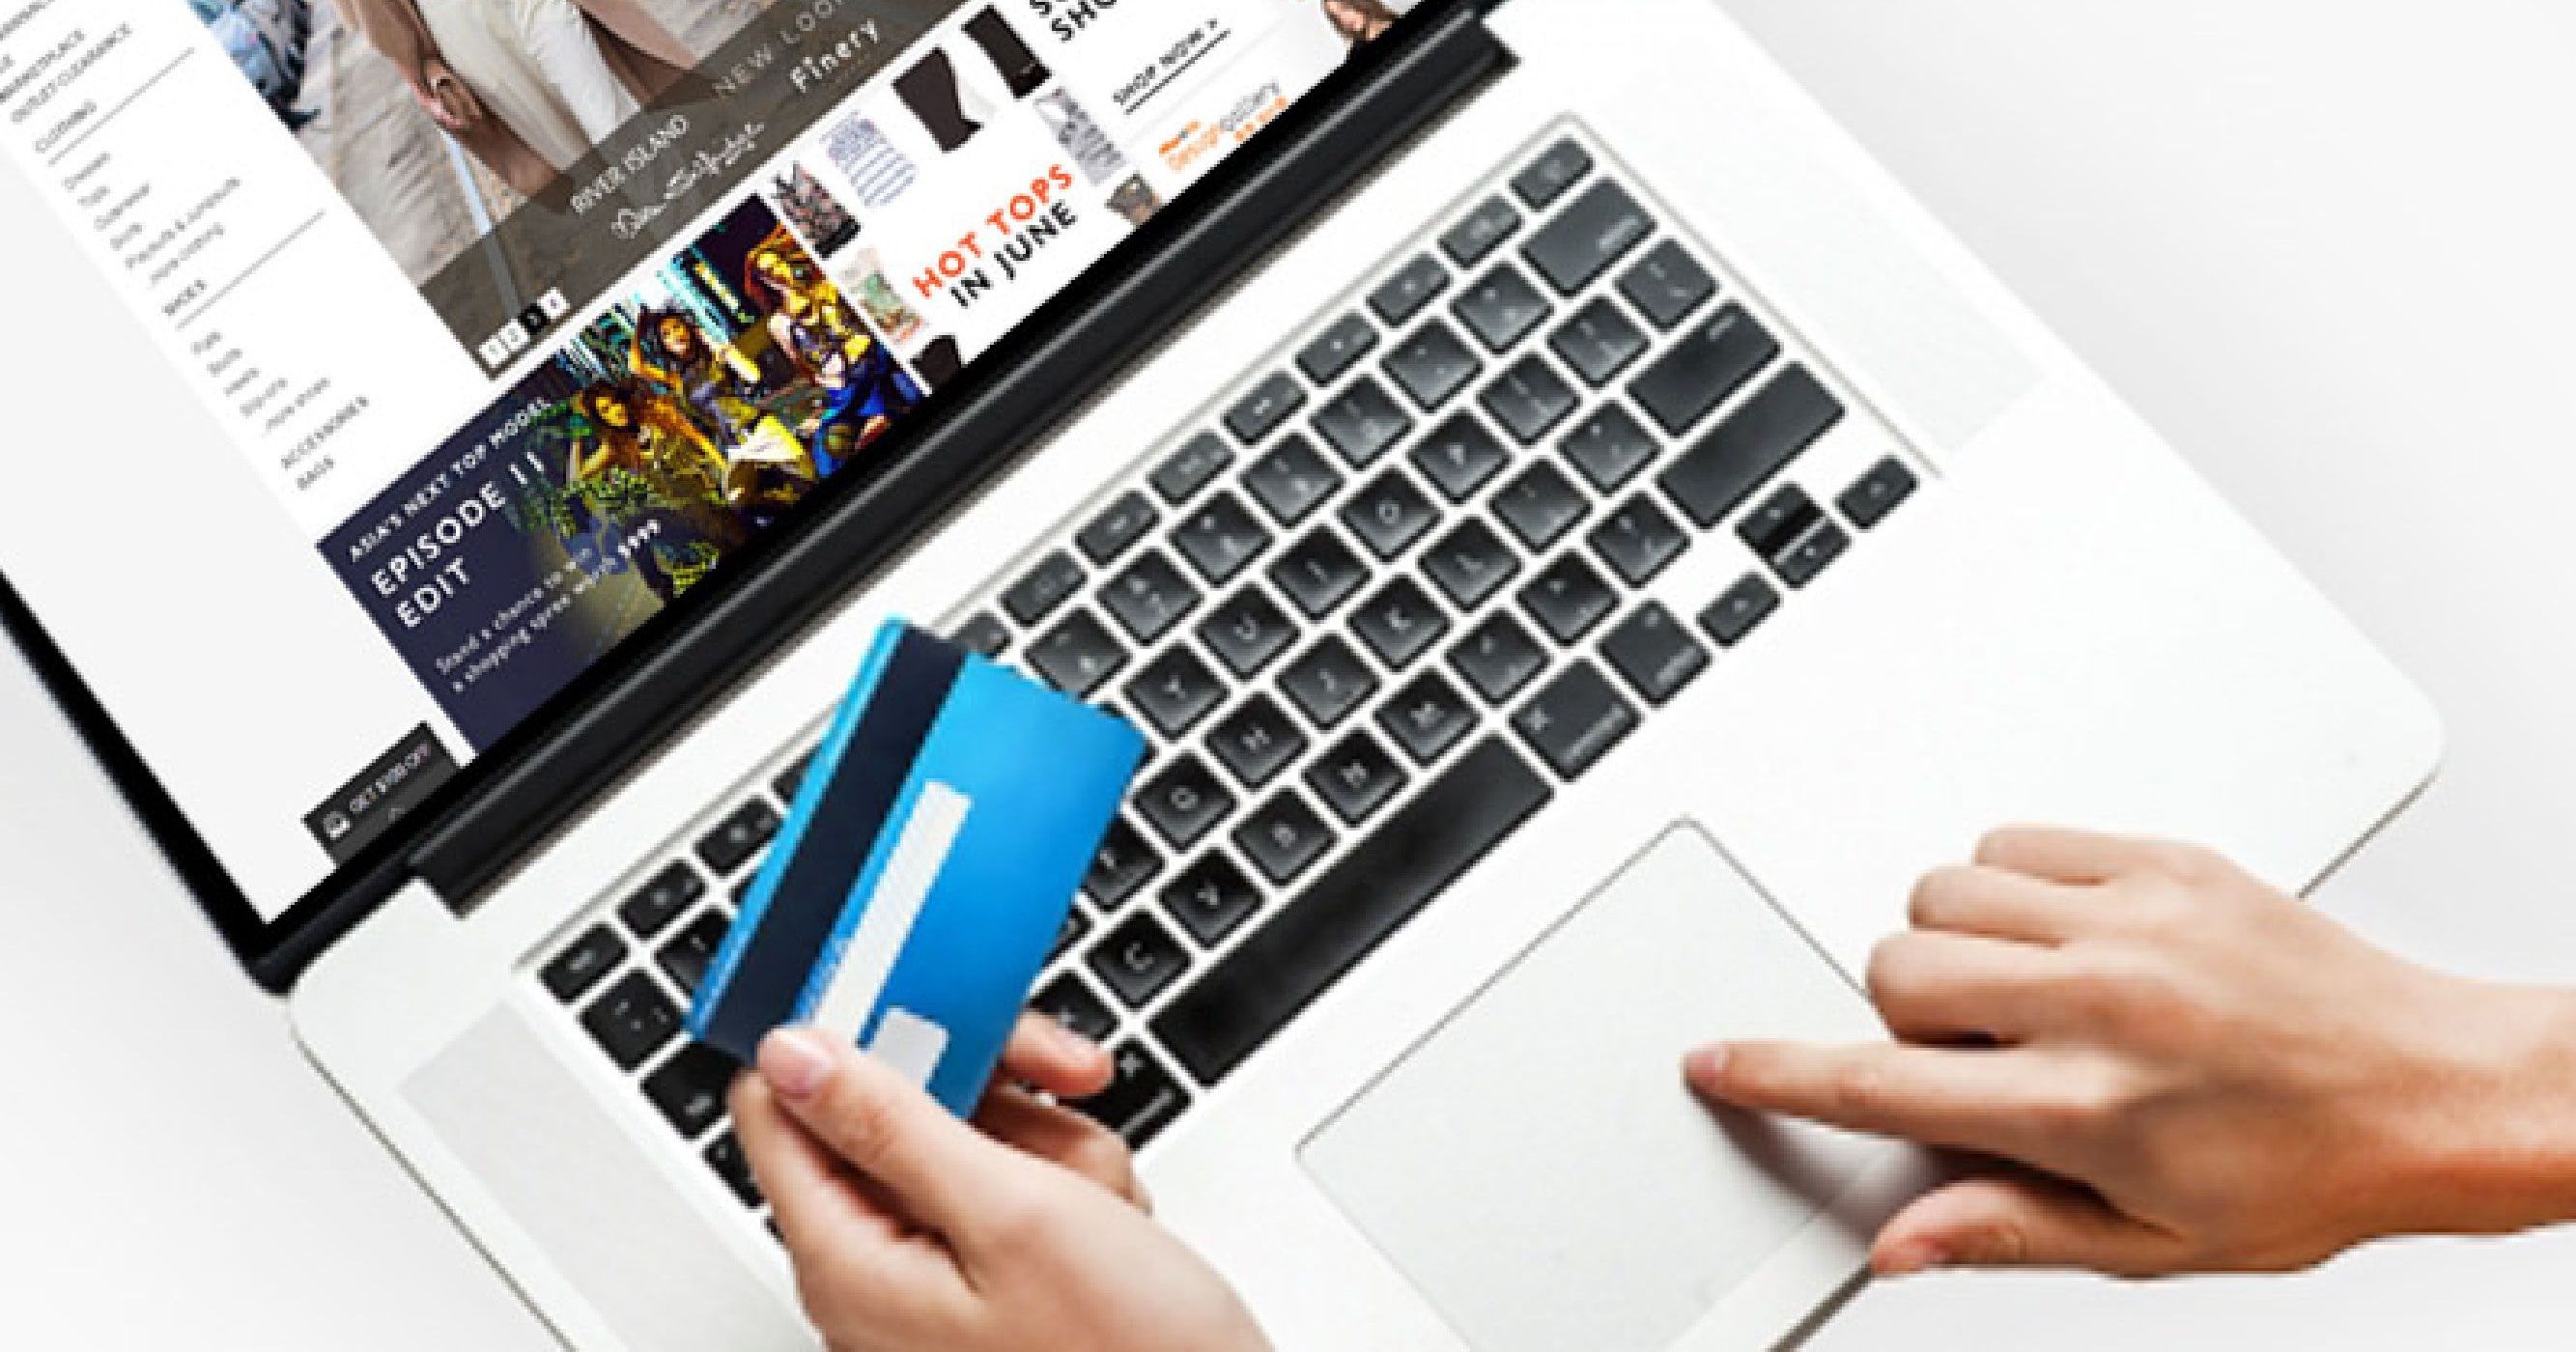 Online shopping is faster, cheaper and better